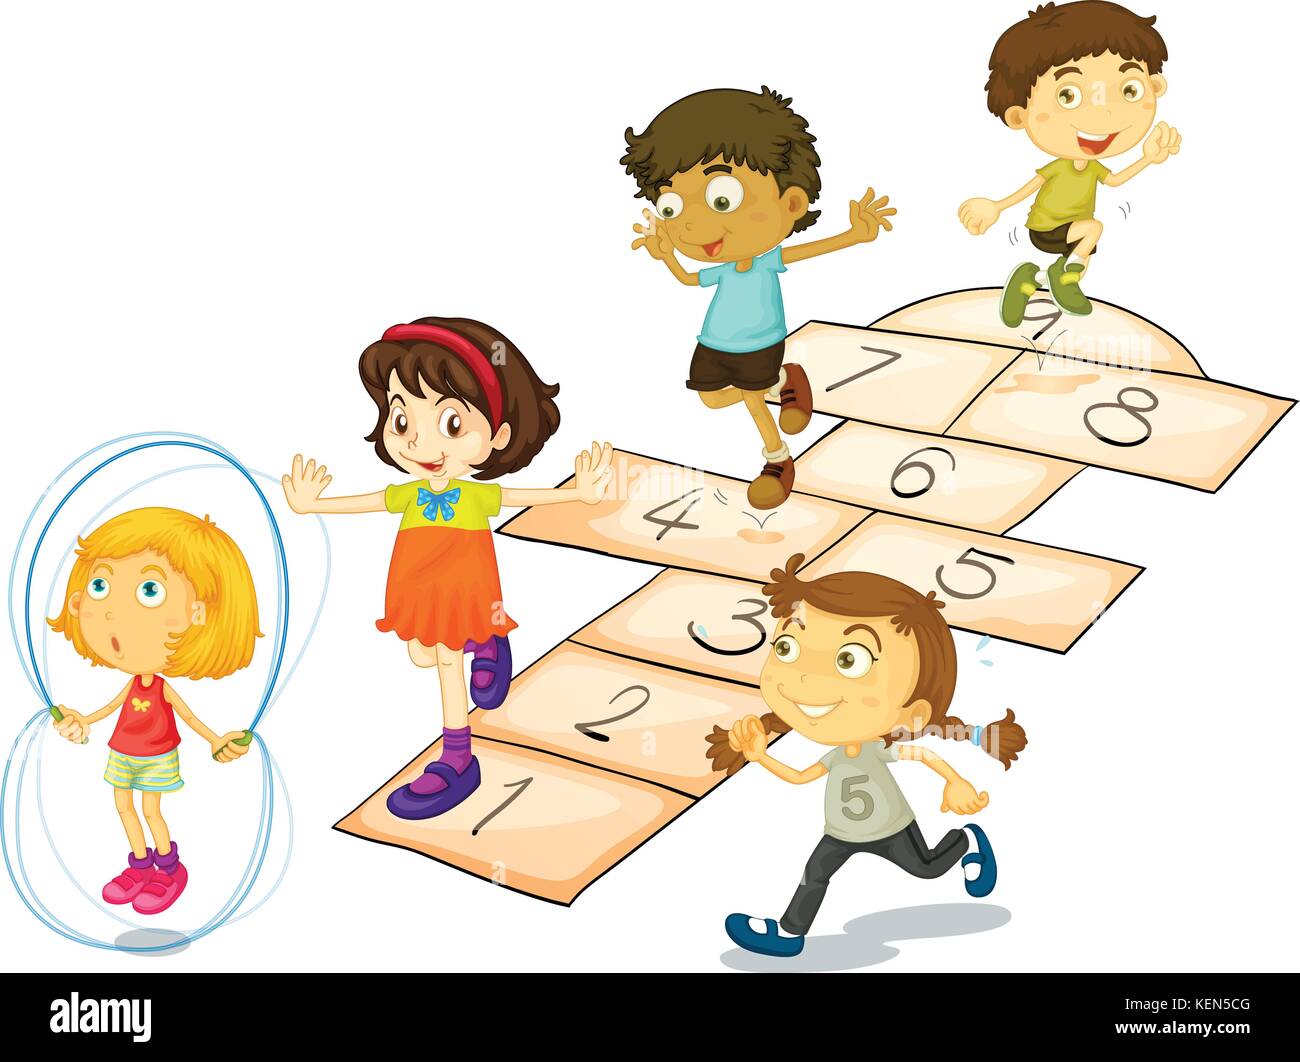 Premium Vector  Children active games infographic with funny games round  dances hopscotch board and catch up games descriptions vector illustration